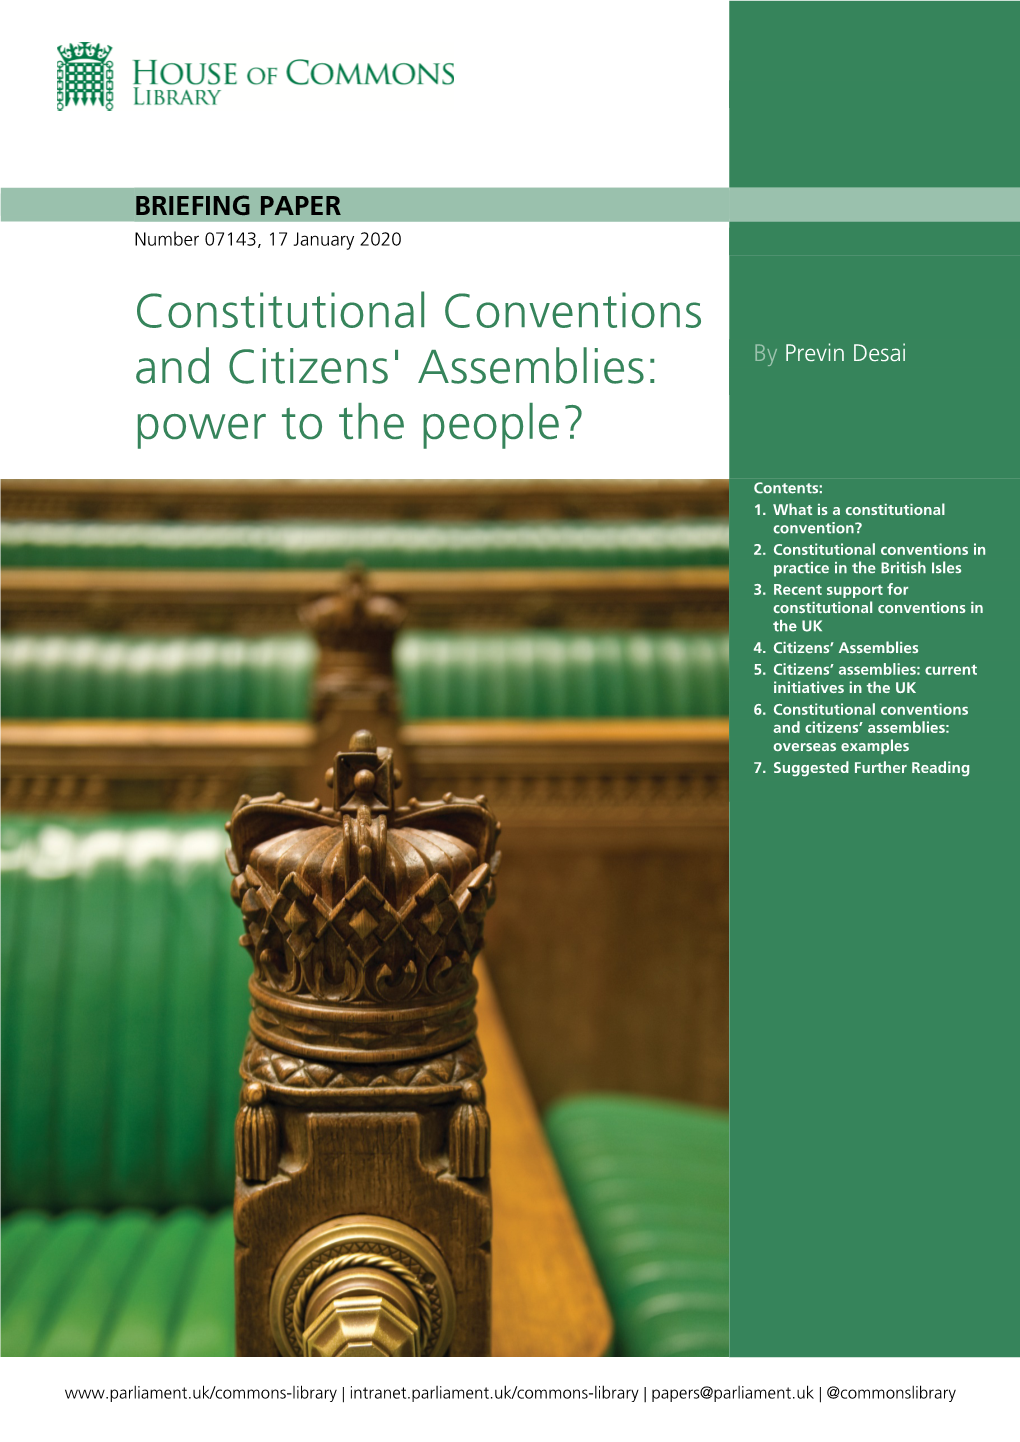 Constitutional Conventions and Citizens' Assemblies: Power to the People?